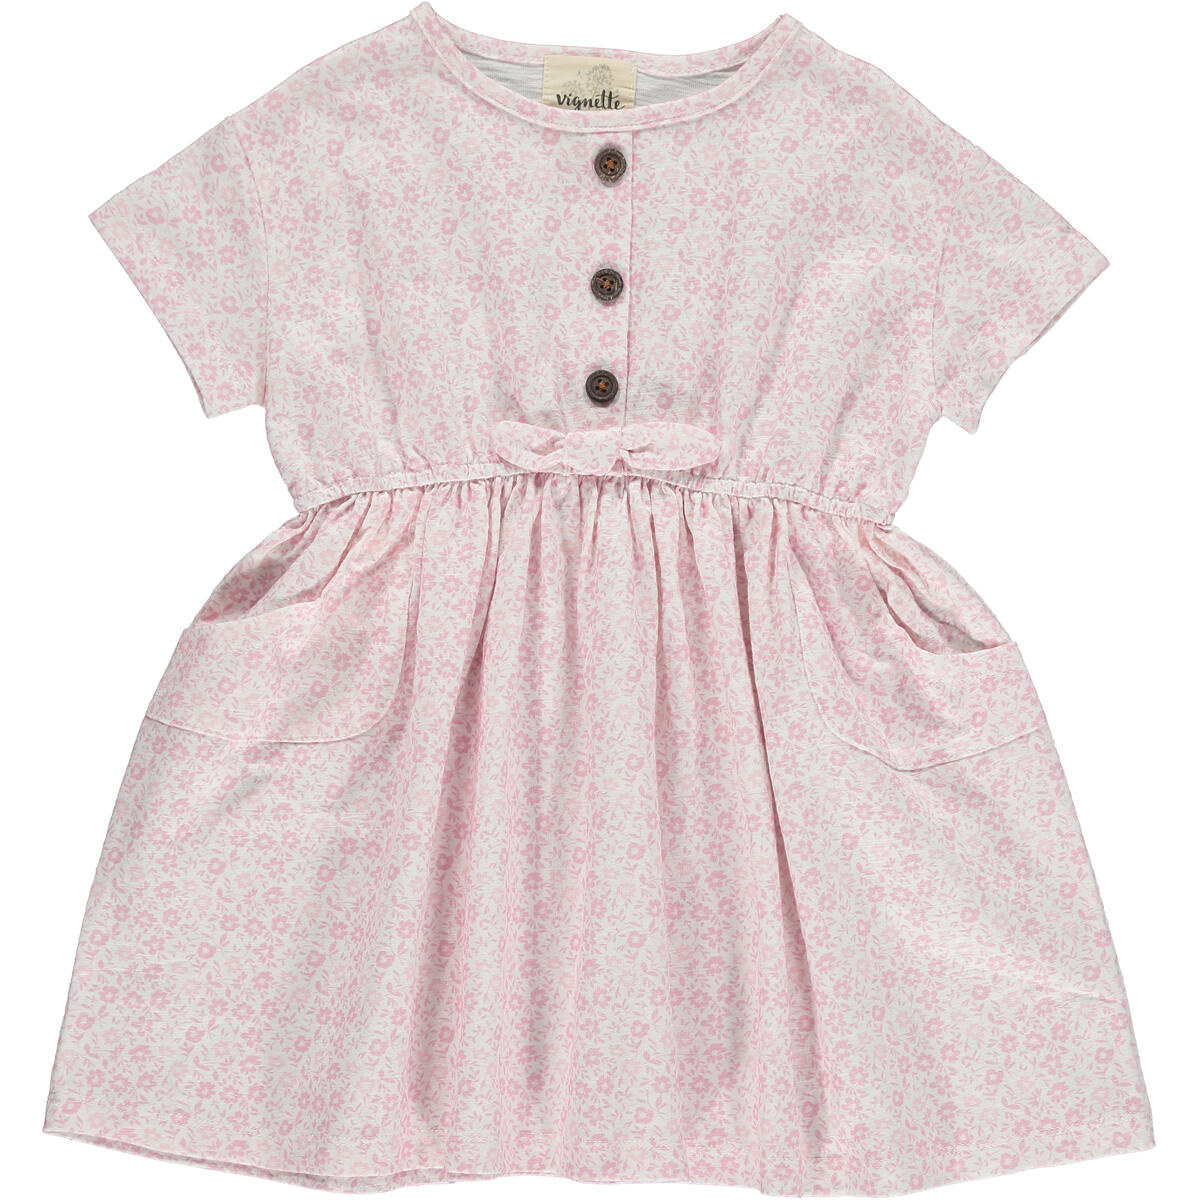 Vignette Daisy Dress Pink Ditsy Floral